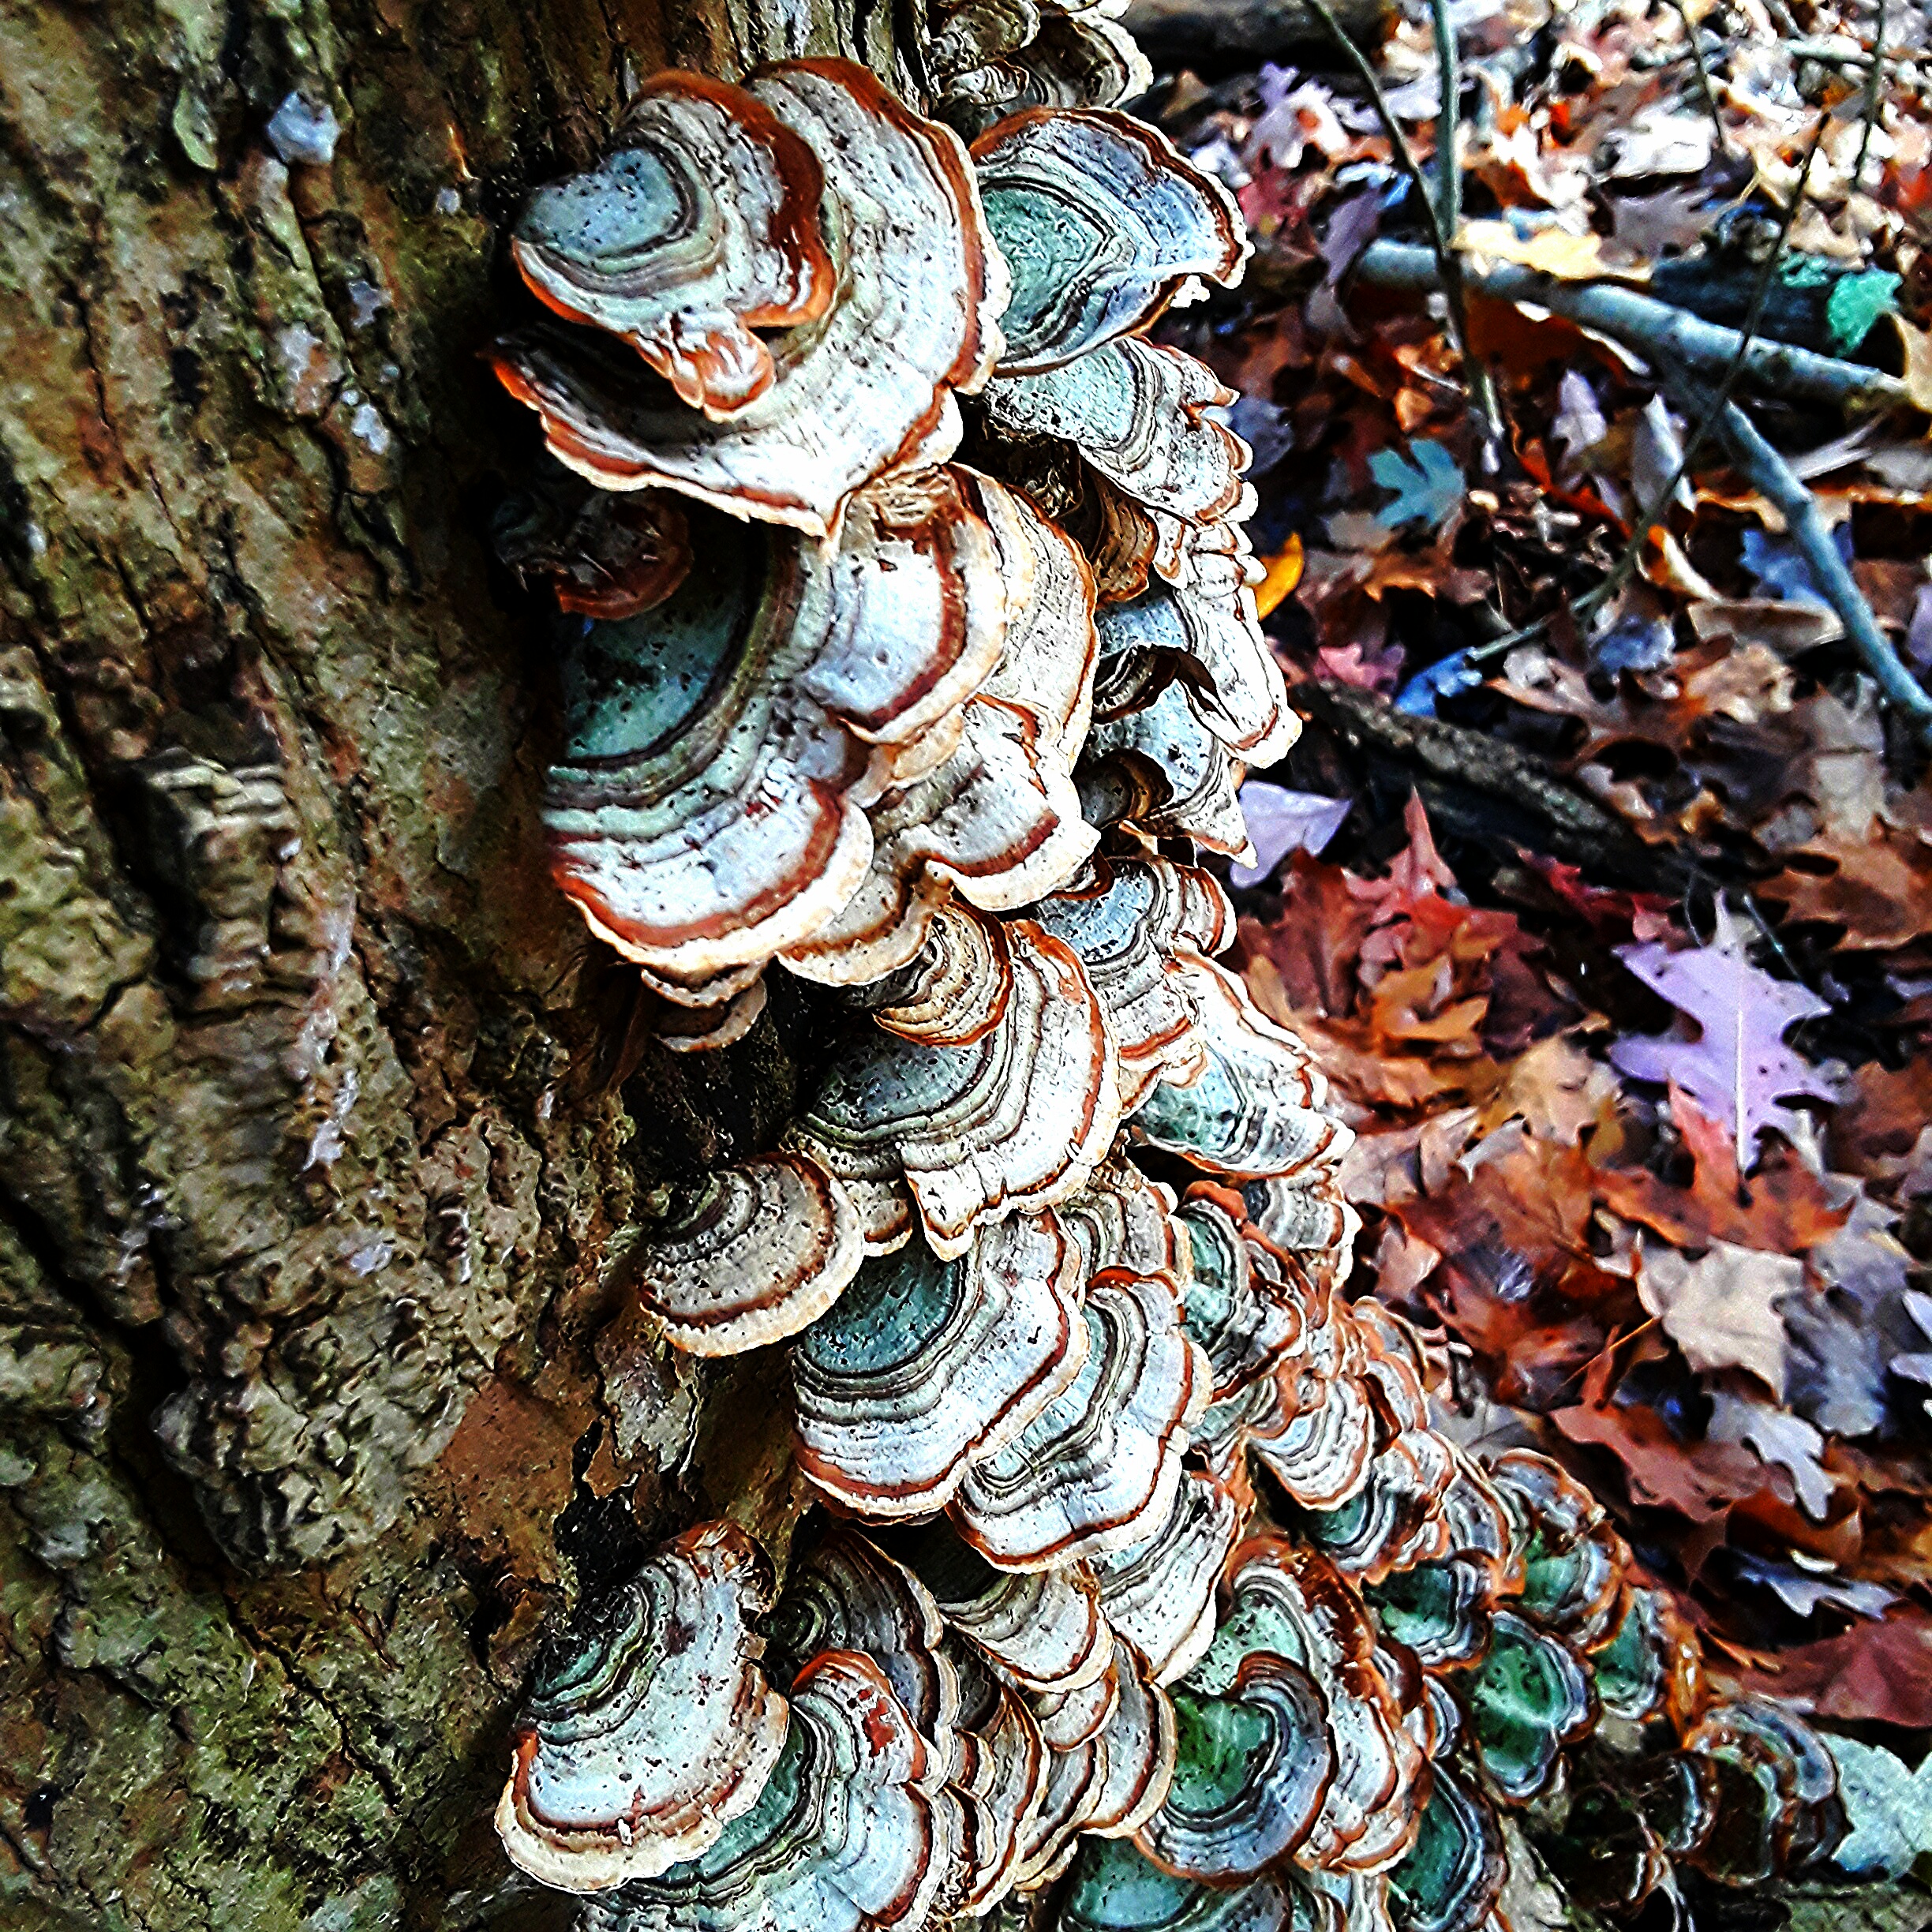 The fungi offer color and pattern.